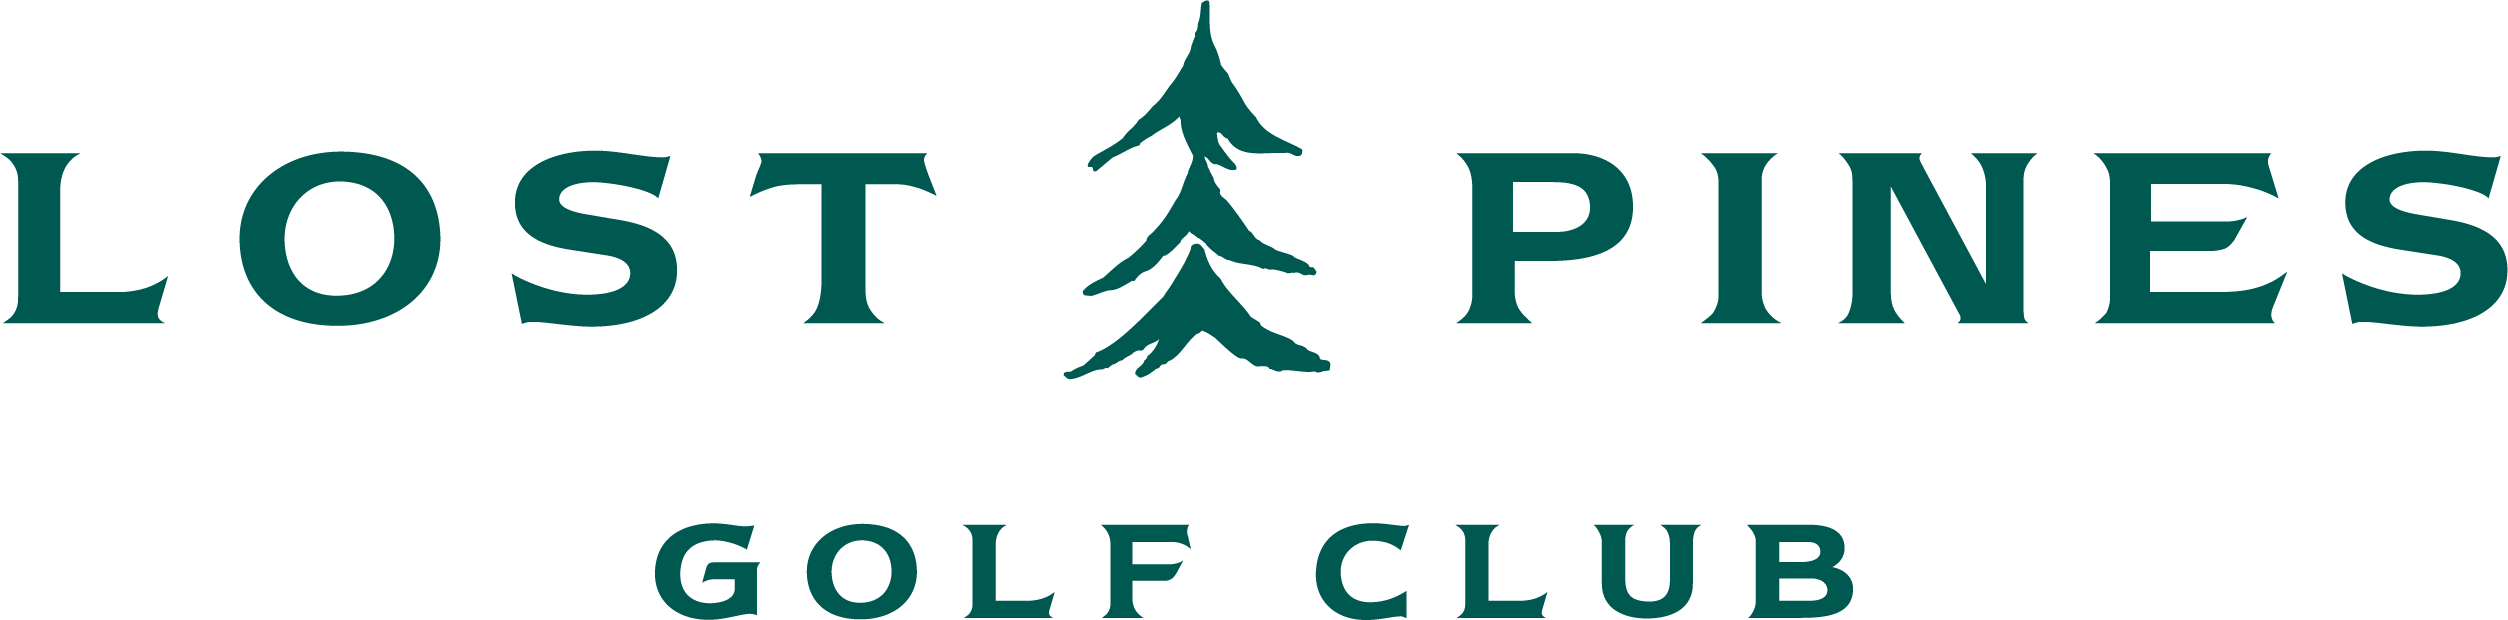 Lost Pines Golf Club Logo Accent Green new